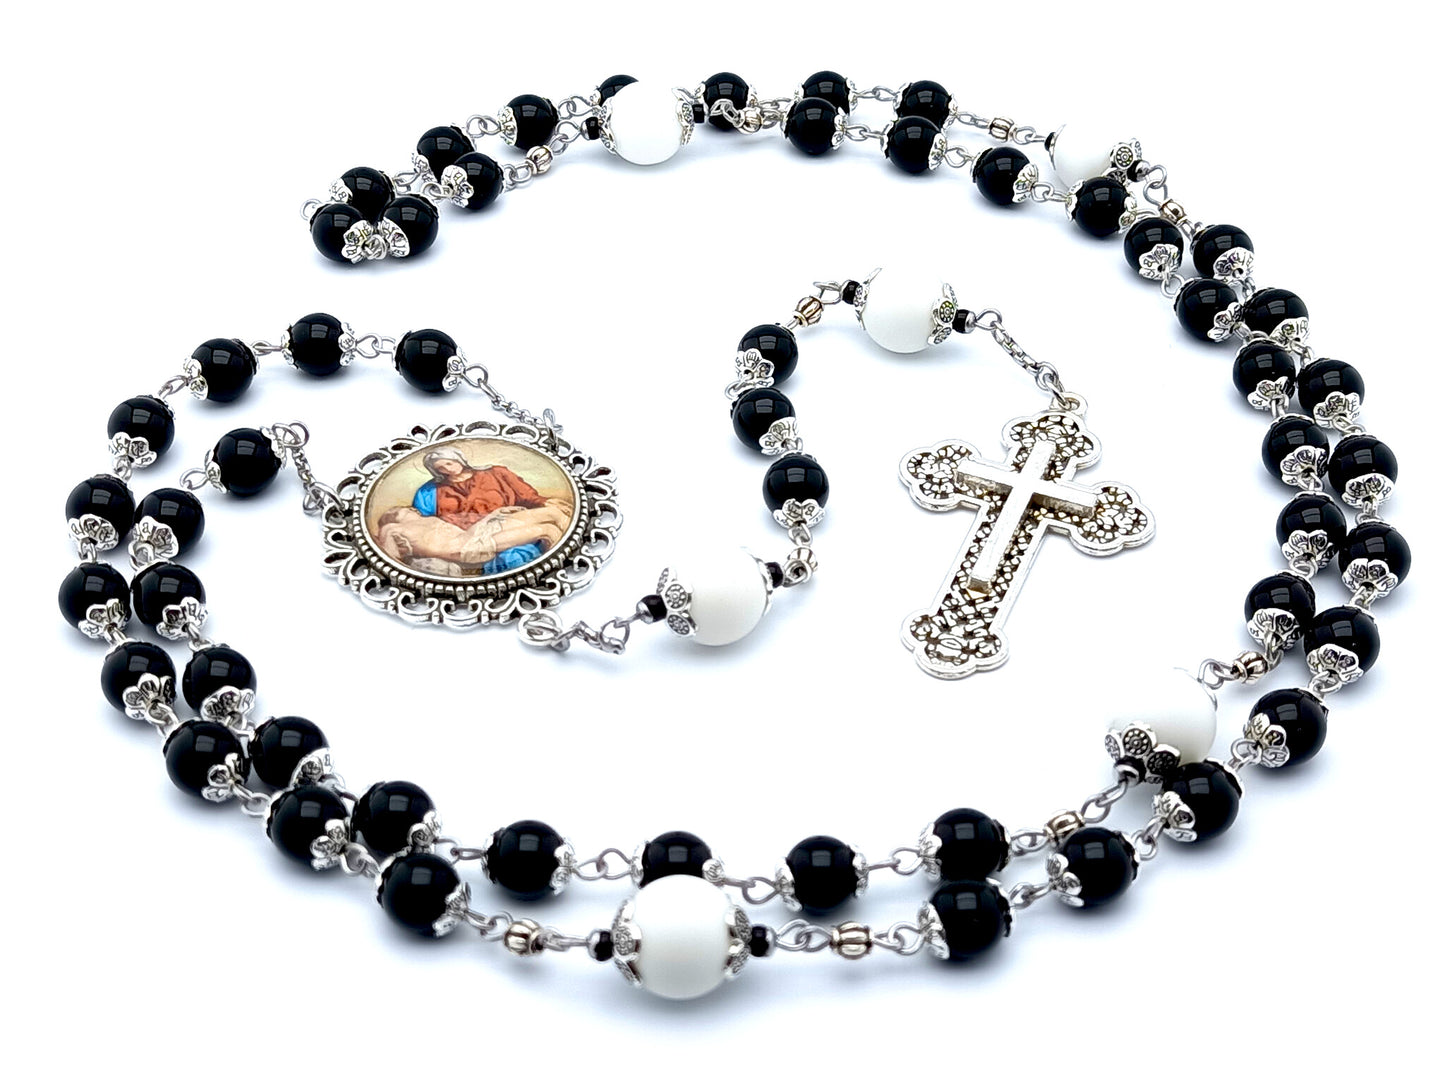 La Pieta unique rosary beads with onyx and alabaster beads, filigree cross and picture medal.